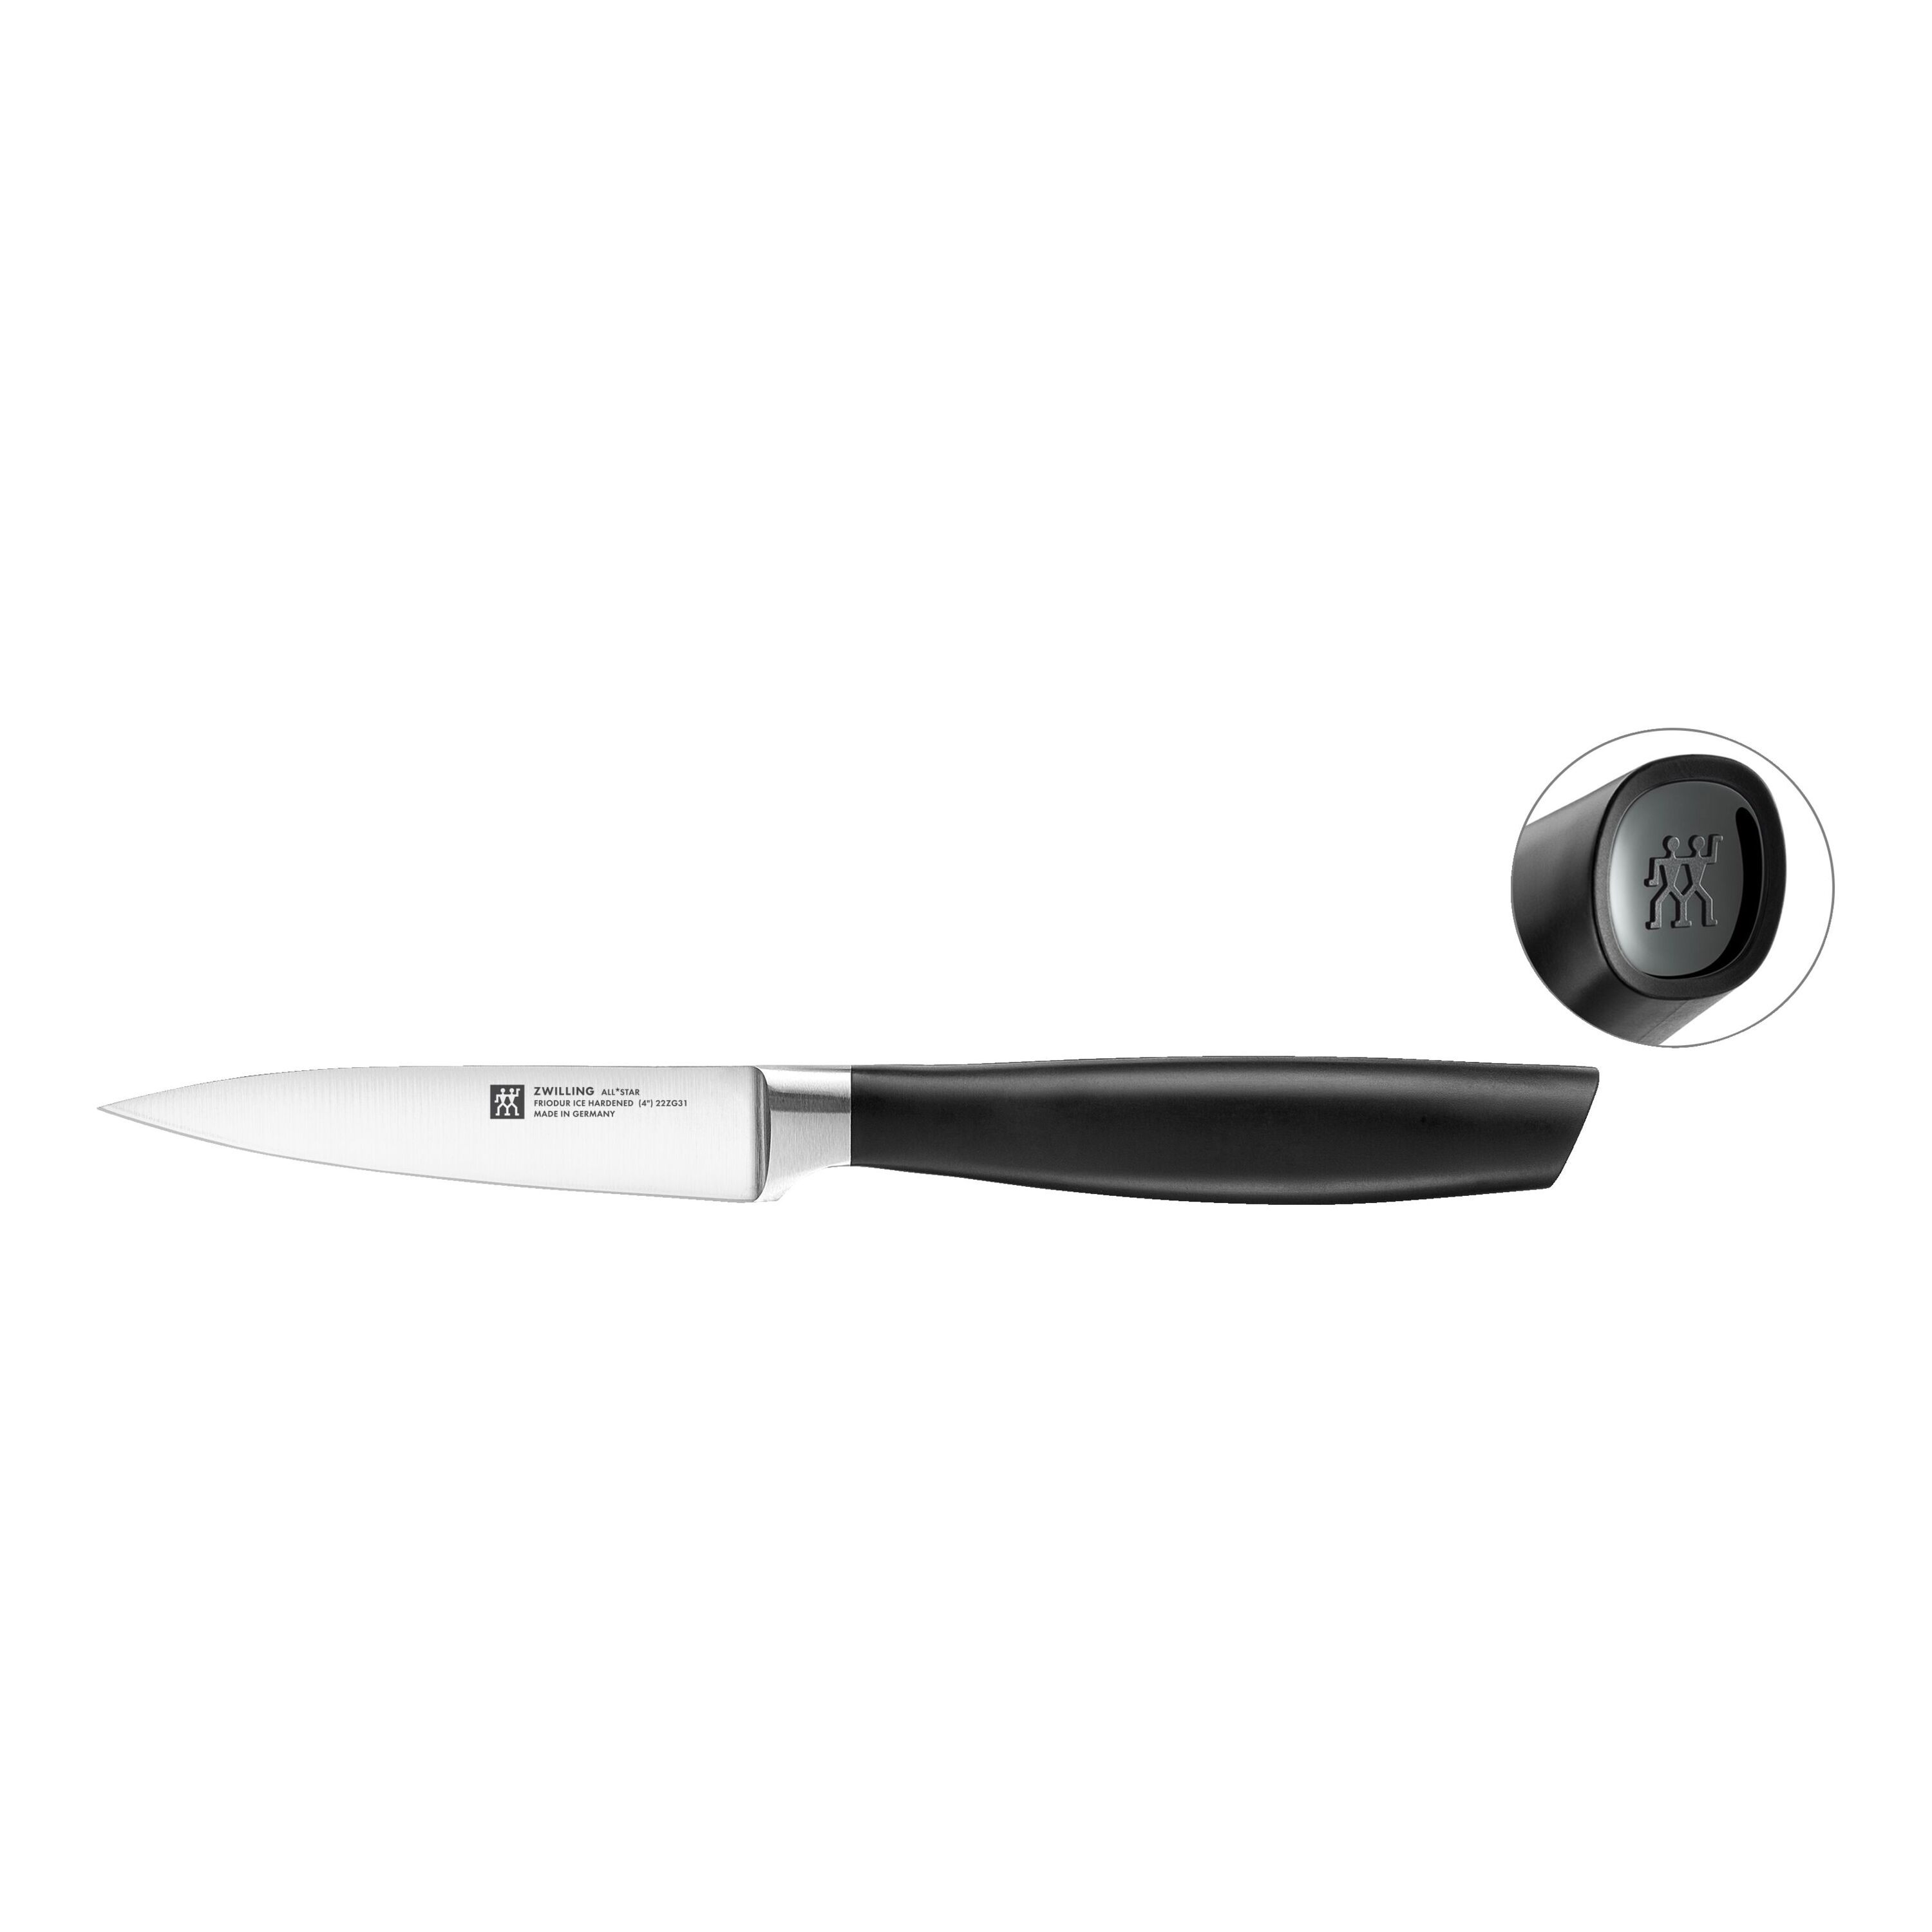  ZWILLING J.A. Henckels Paring Knife, 4 Inch.: Kitchen Utility  Knives: Home & Kitchen